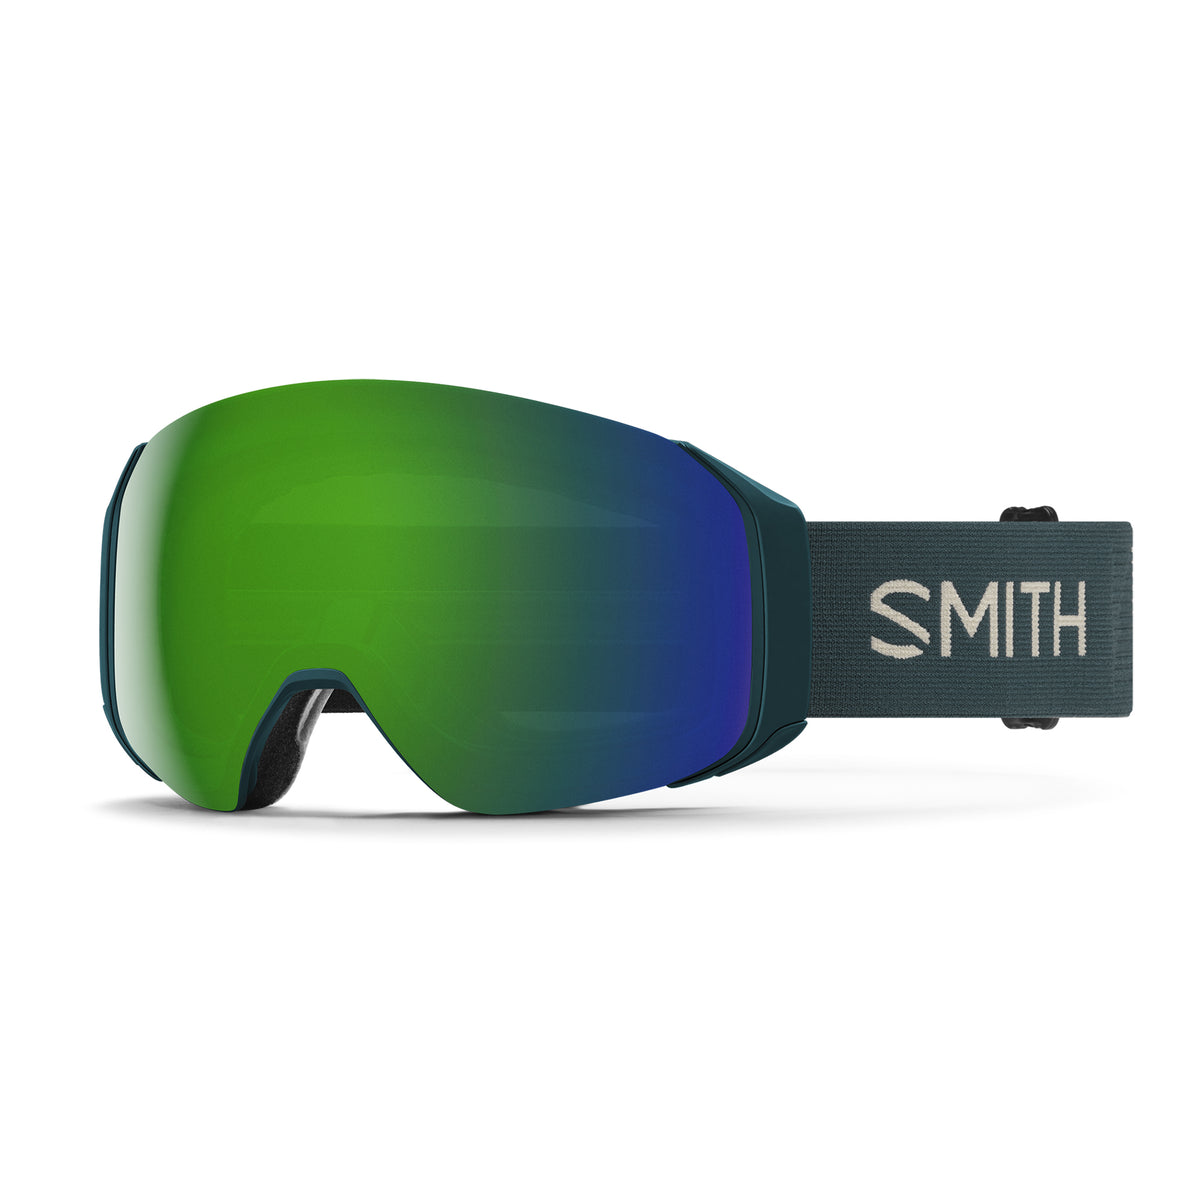 Smith 4D MAG S Snow Goggles